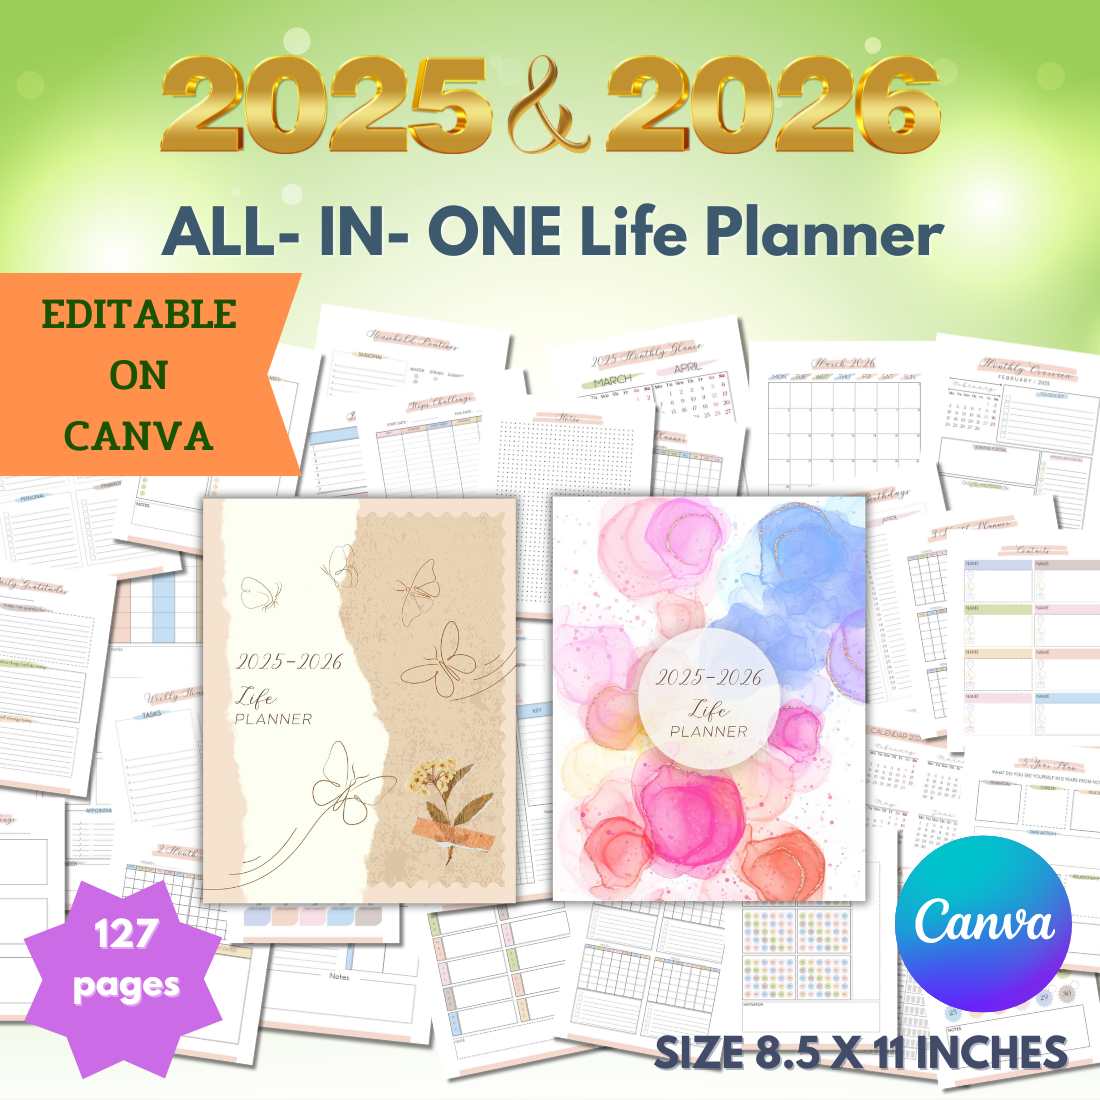 2025-2026 All-in-one Life Planner cover image.